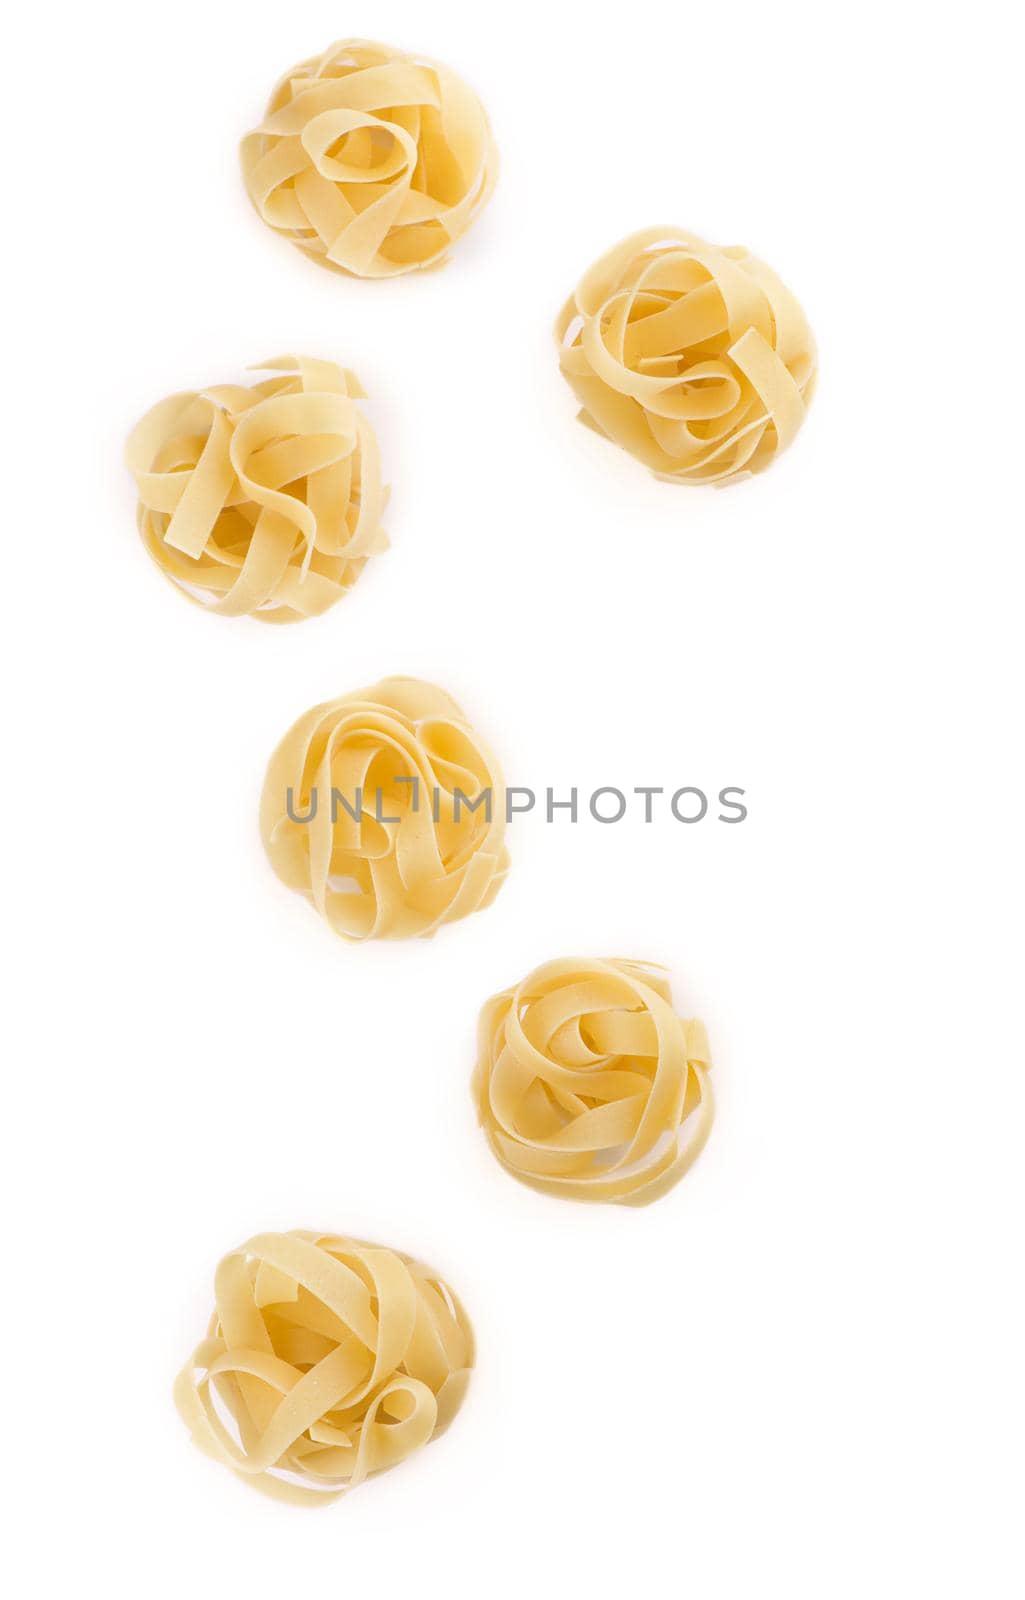 Spaghetti and basil isolated on white background. With clipping path.